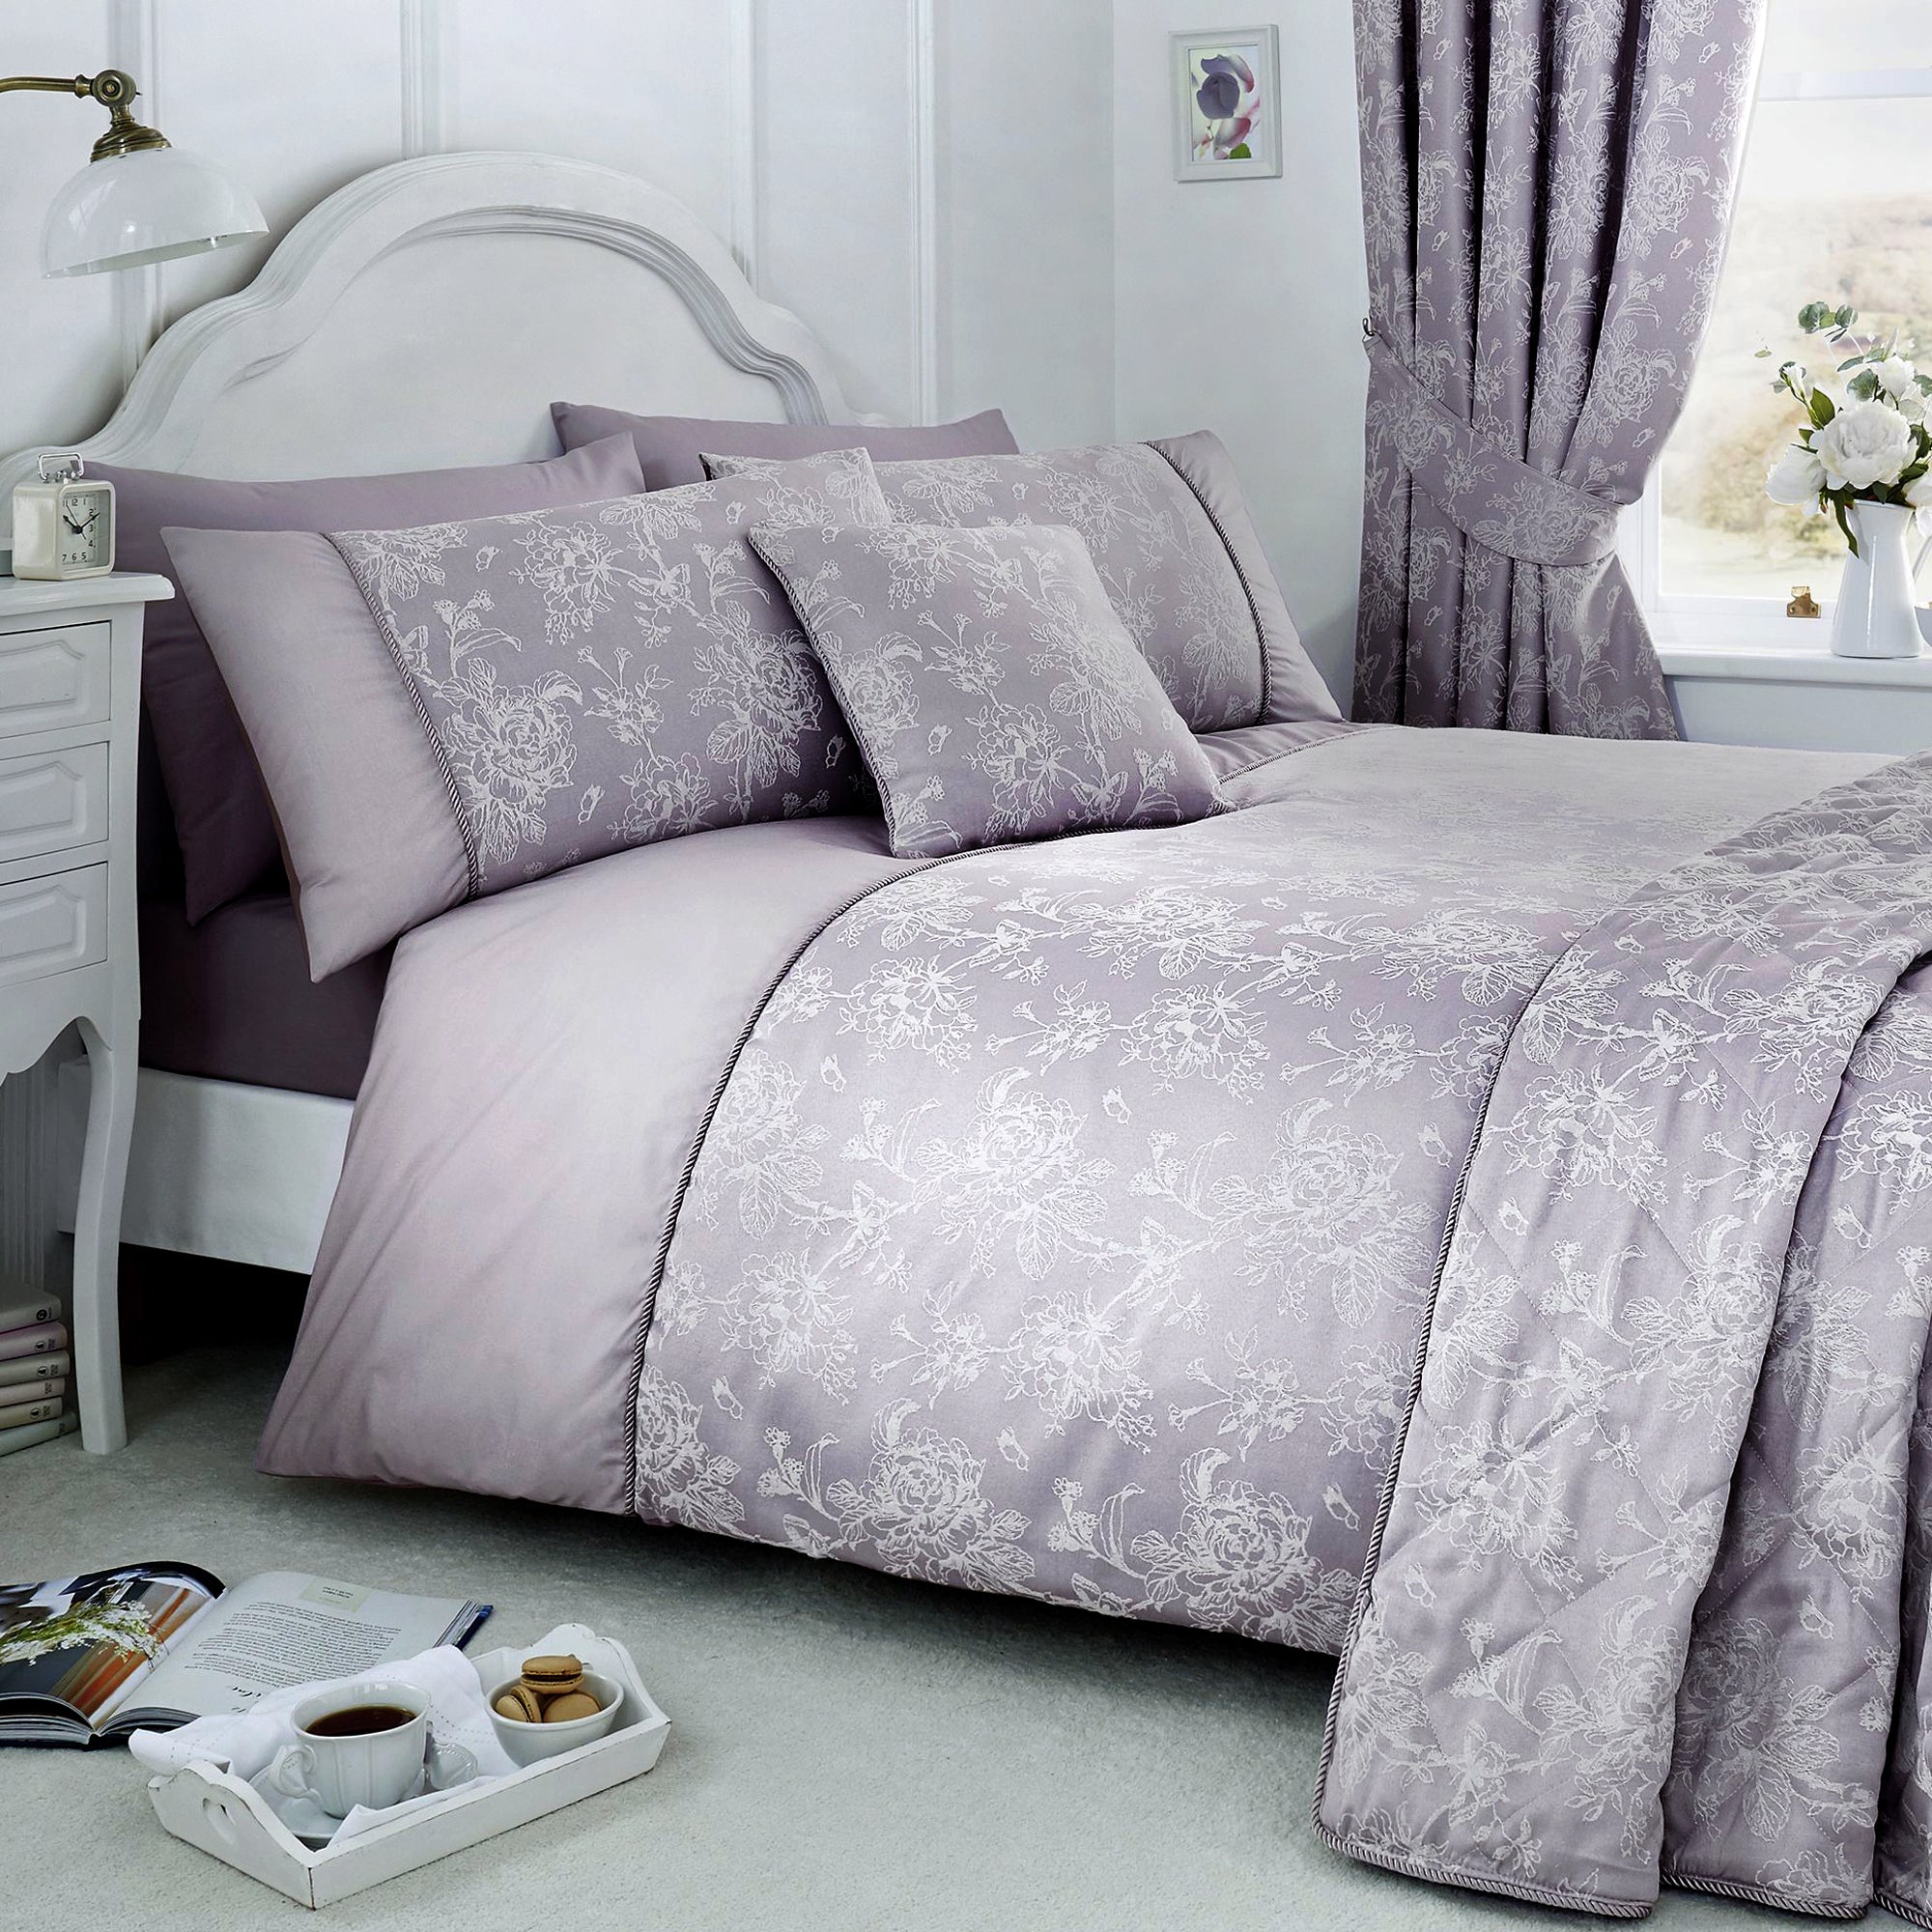 Jasmine - Damask Easy Care Bedding Set, Curtains & Cushions in Lavender - by D&D Woven